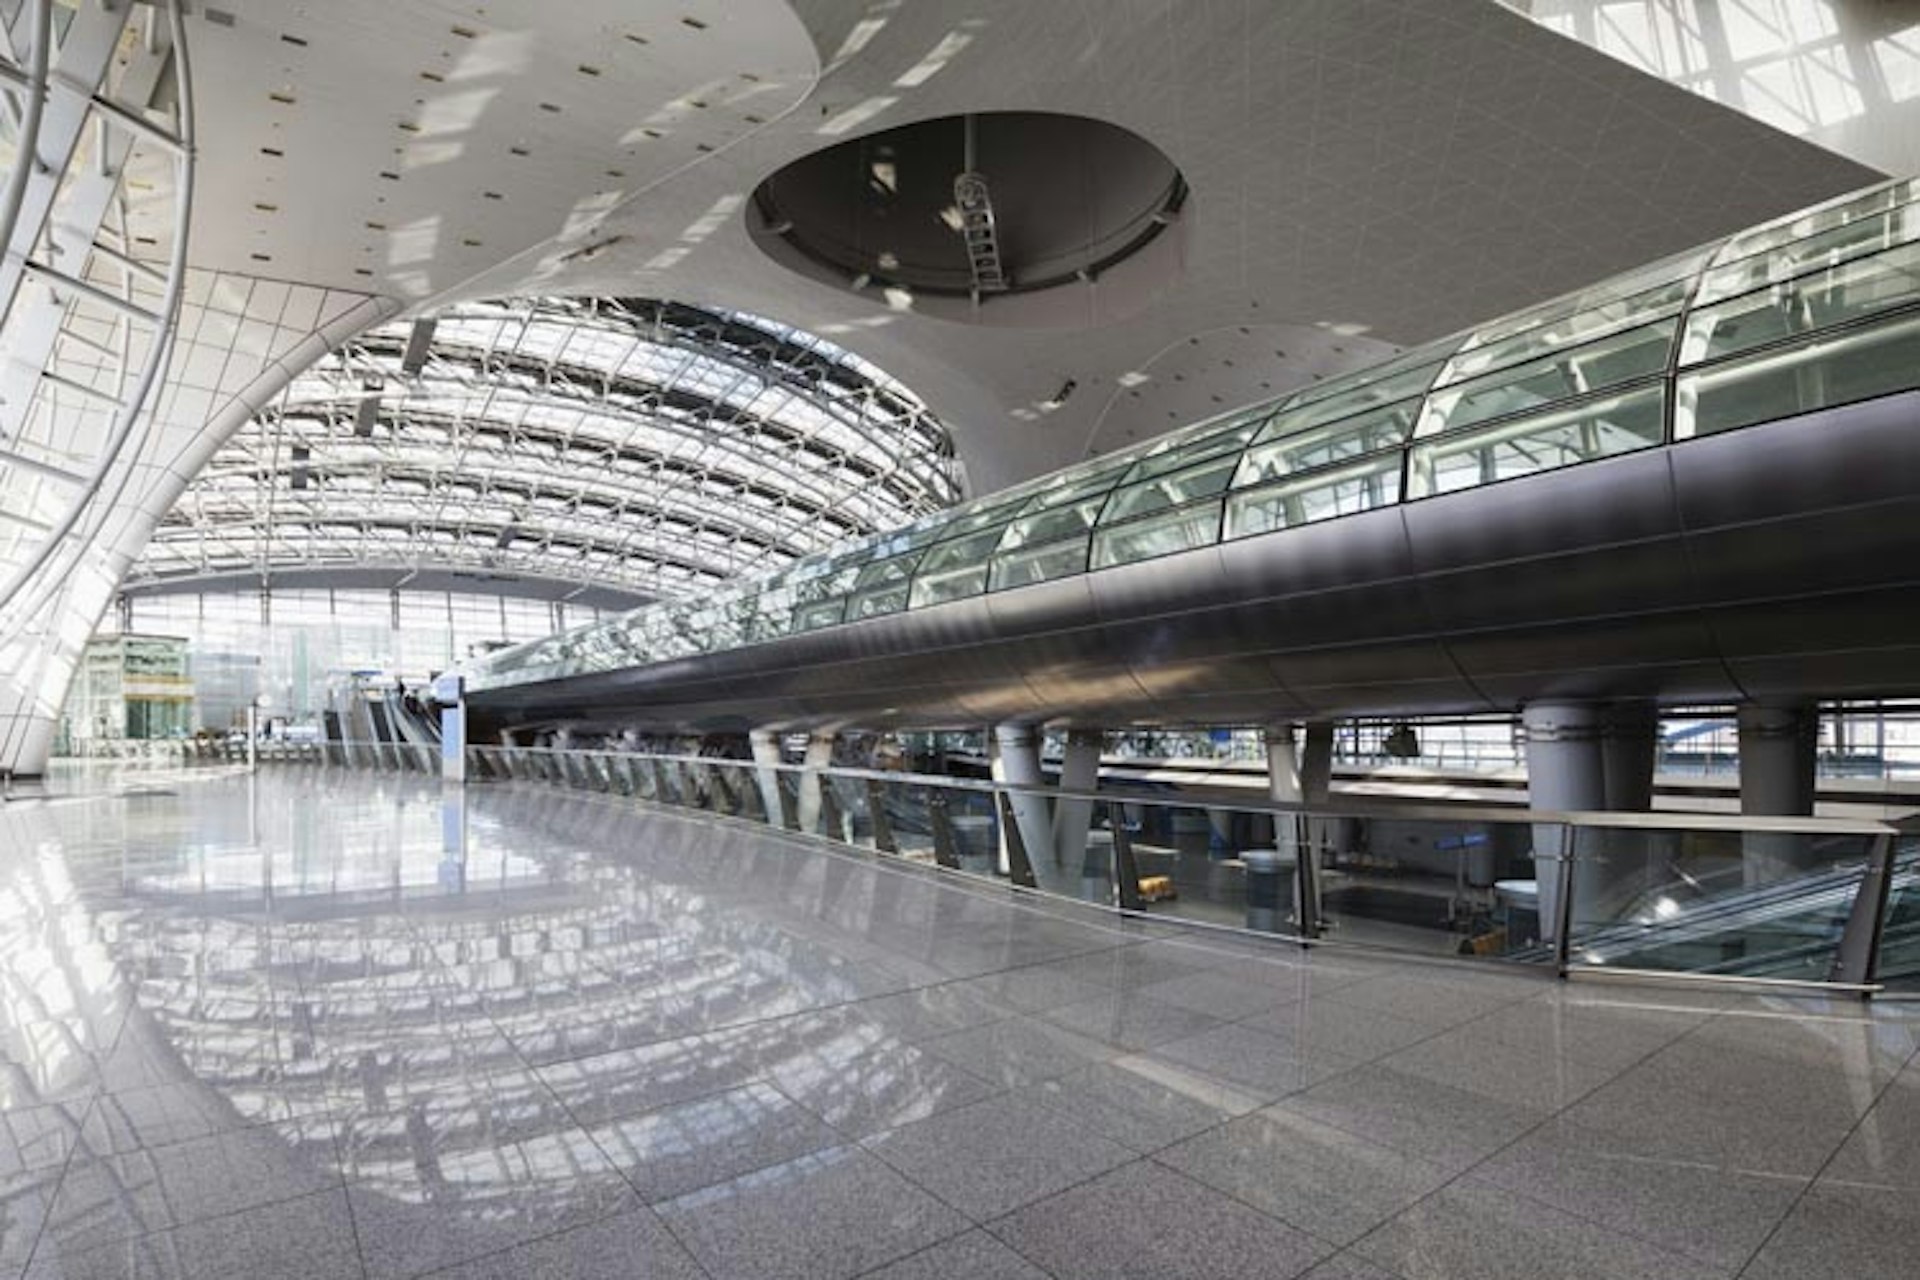 Don't be fooled by the sci-fi feel of Korea's Incheon airport, cultural performances and other local flair are brightening this airport's ambiance. Image by Christian Kober / Getty Images